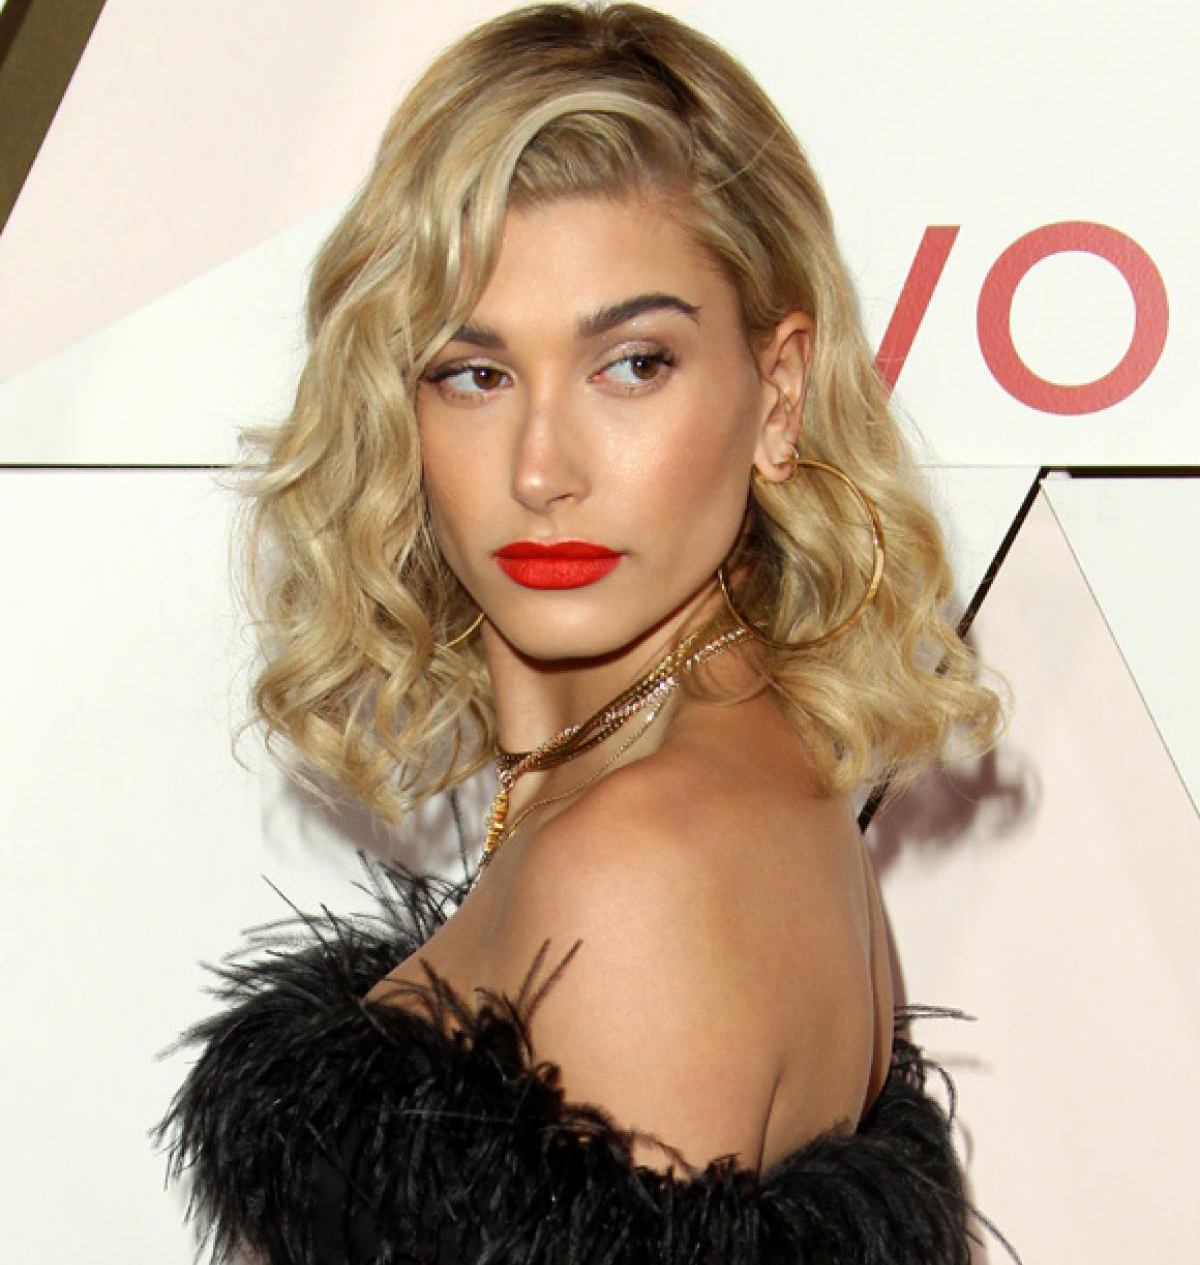 Hailey Bieber Opens Up About Her Struggle With Anxiety We Need To